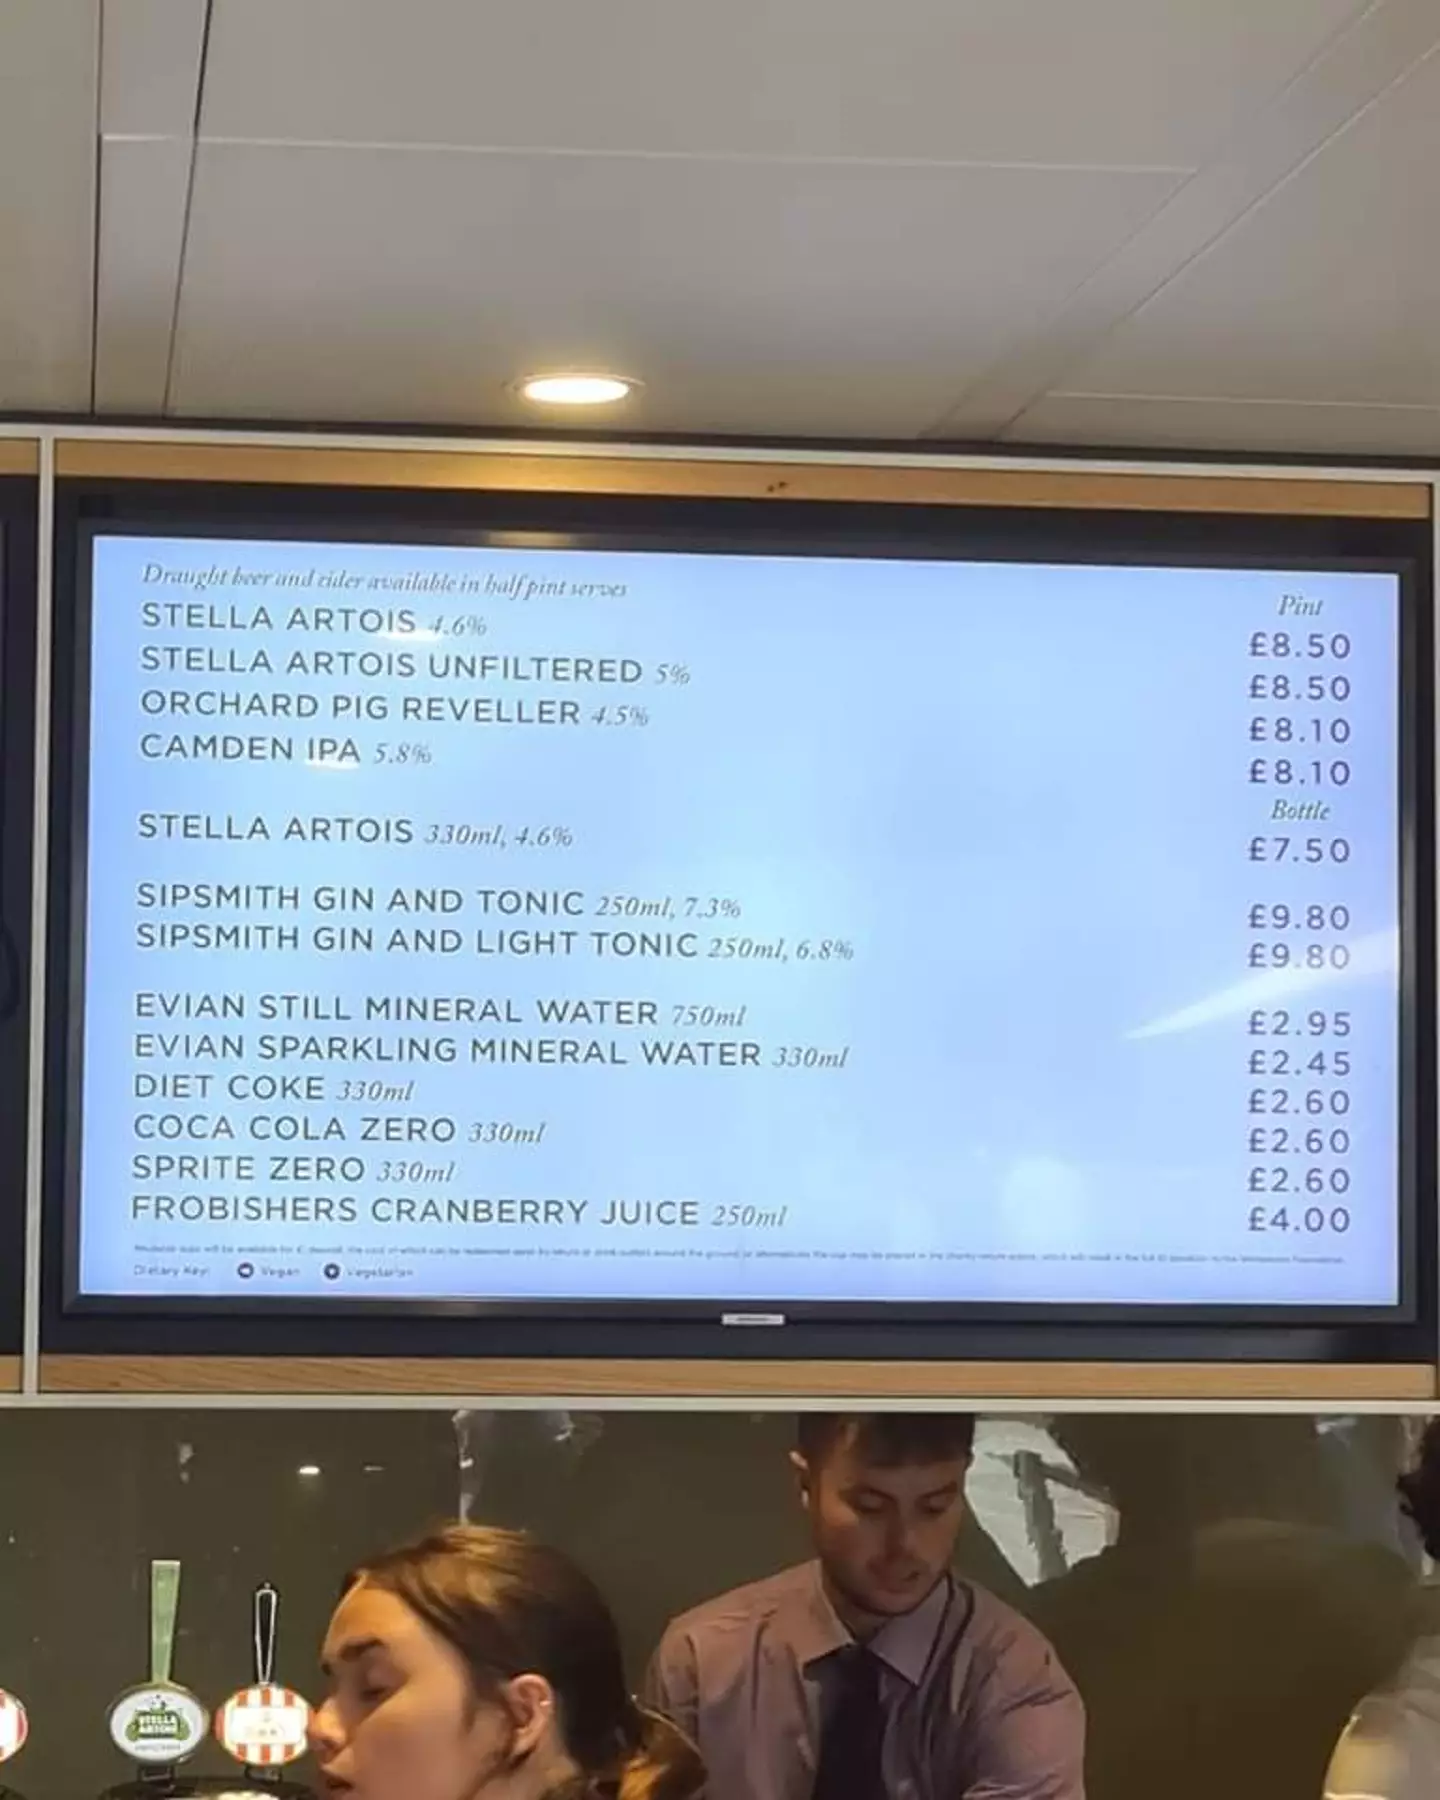 If you want a pint at Wimbledon it's going to cost £8.50, hope Stella's okay. (X)